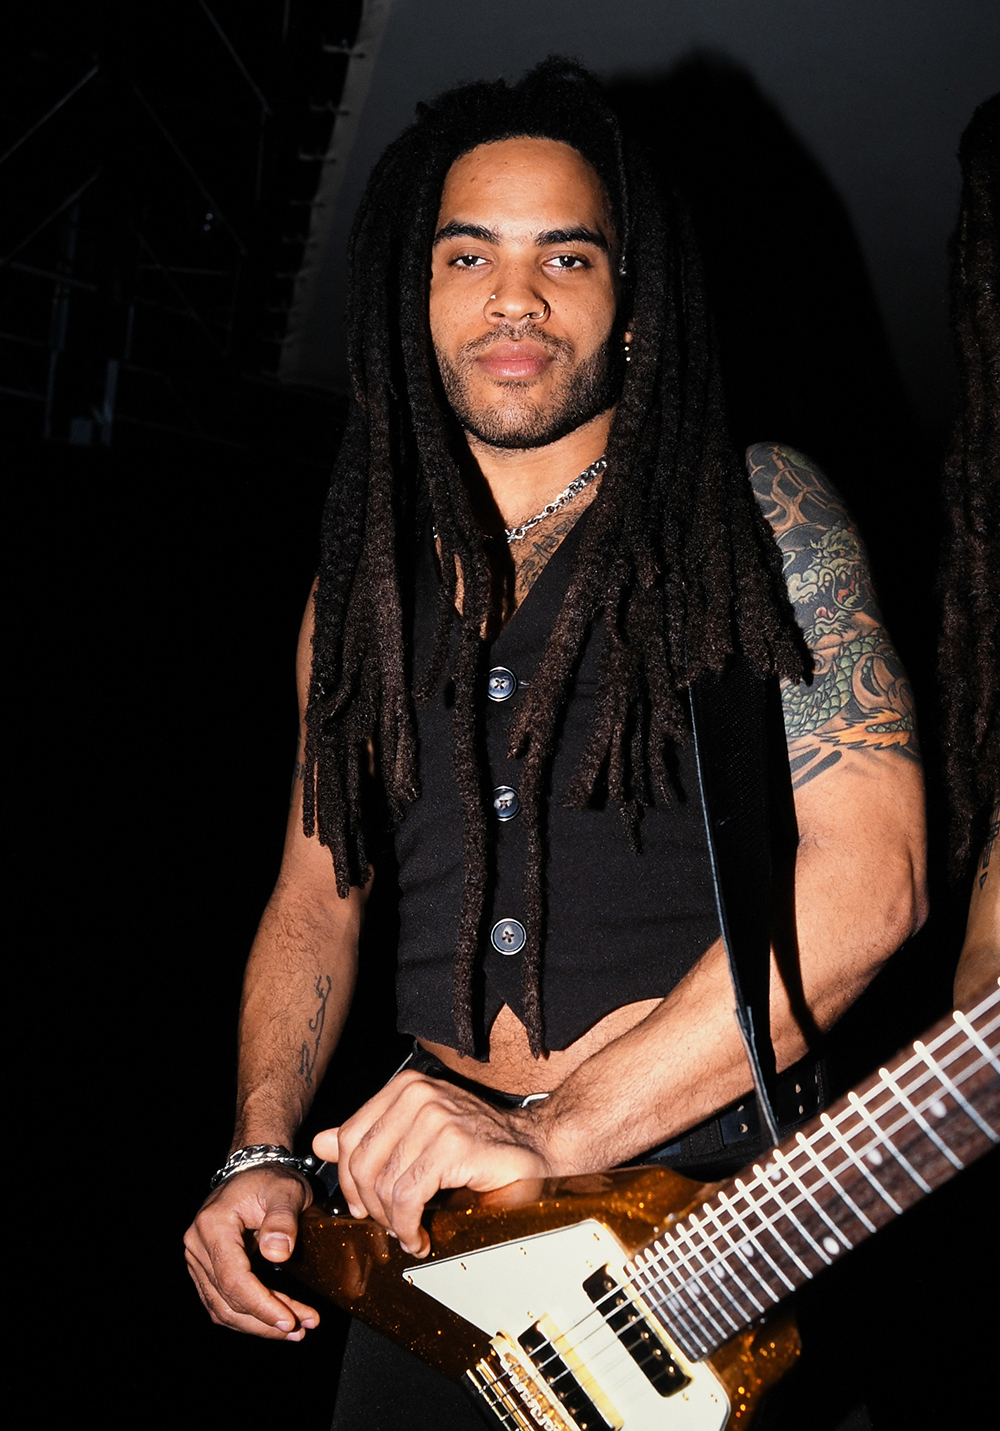 <p>Lenny Kravitz with his guitar in 1996. He looked like he was ready to rock.</p>